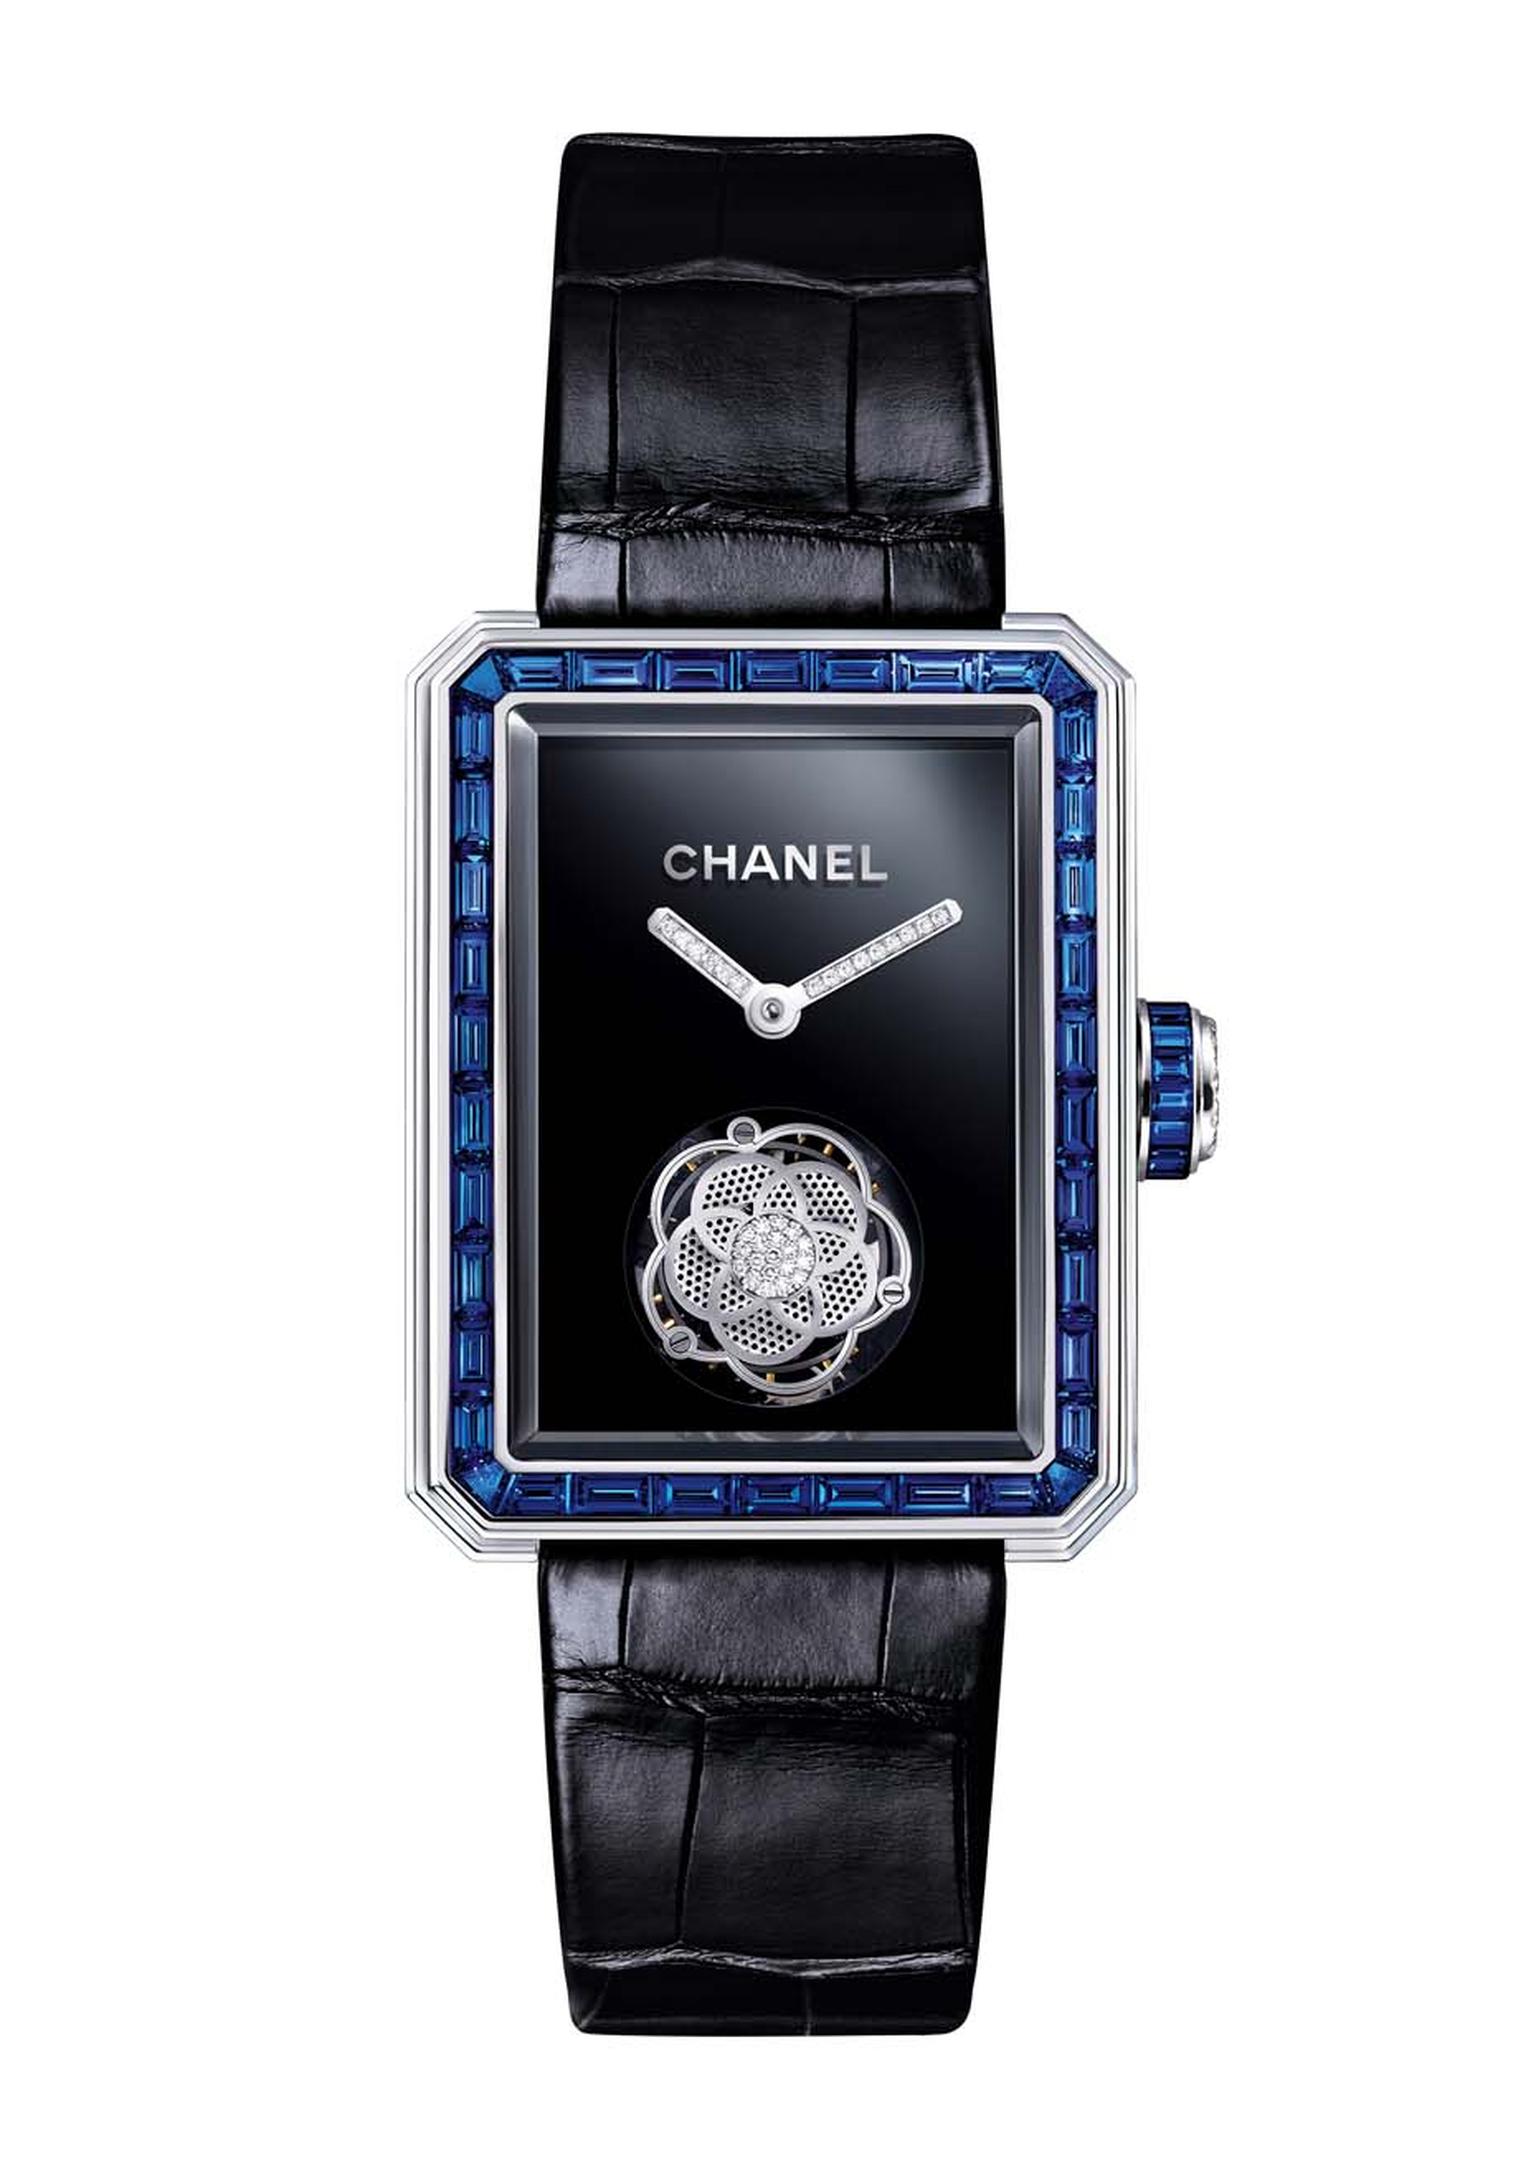 Chanel Première Flying Tourbillon ladies' watch owes its octagonal geometry to the Place Vendôme, just like the stopper of Chanel's No.5 perfume bottle. A stylized camellia flower twirls with the tourbillon while intense blue sapphires grace the white gol